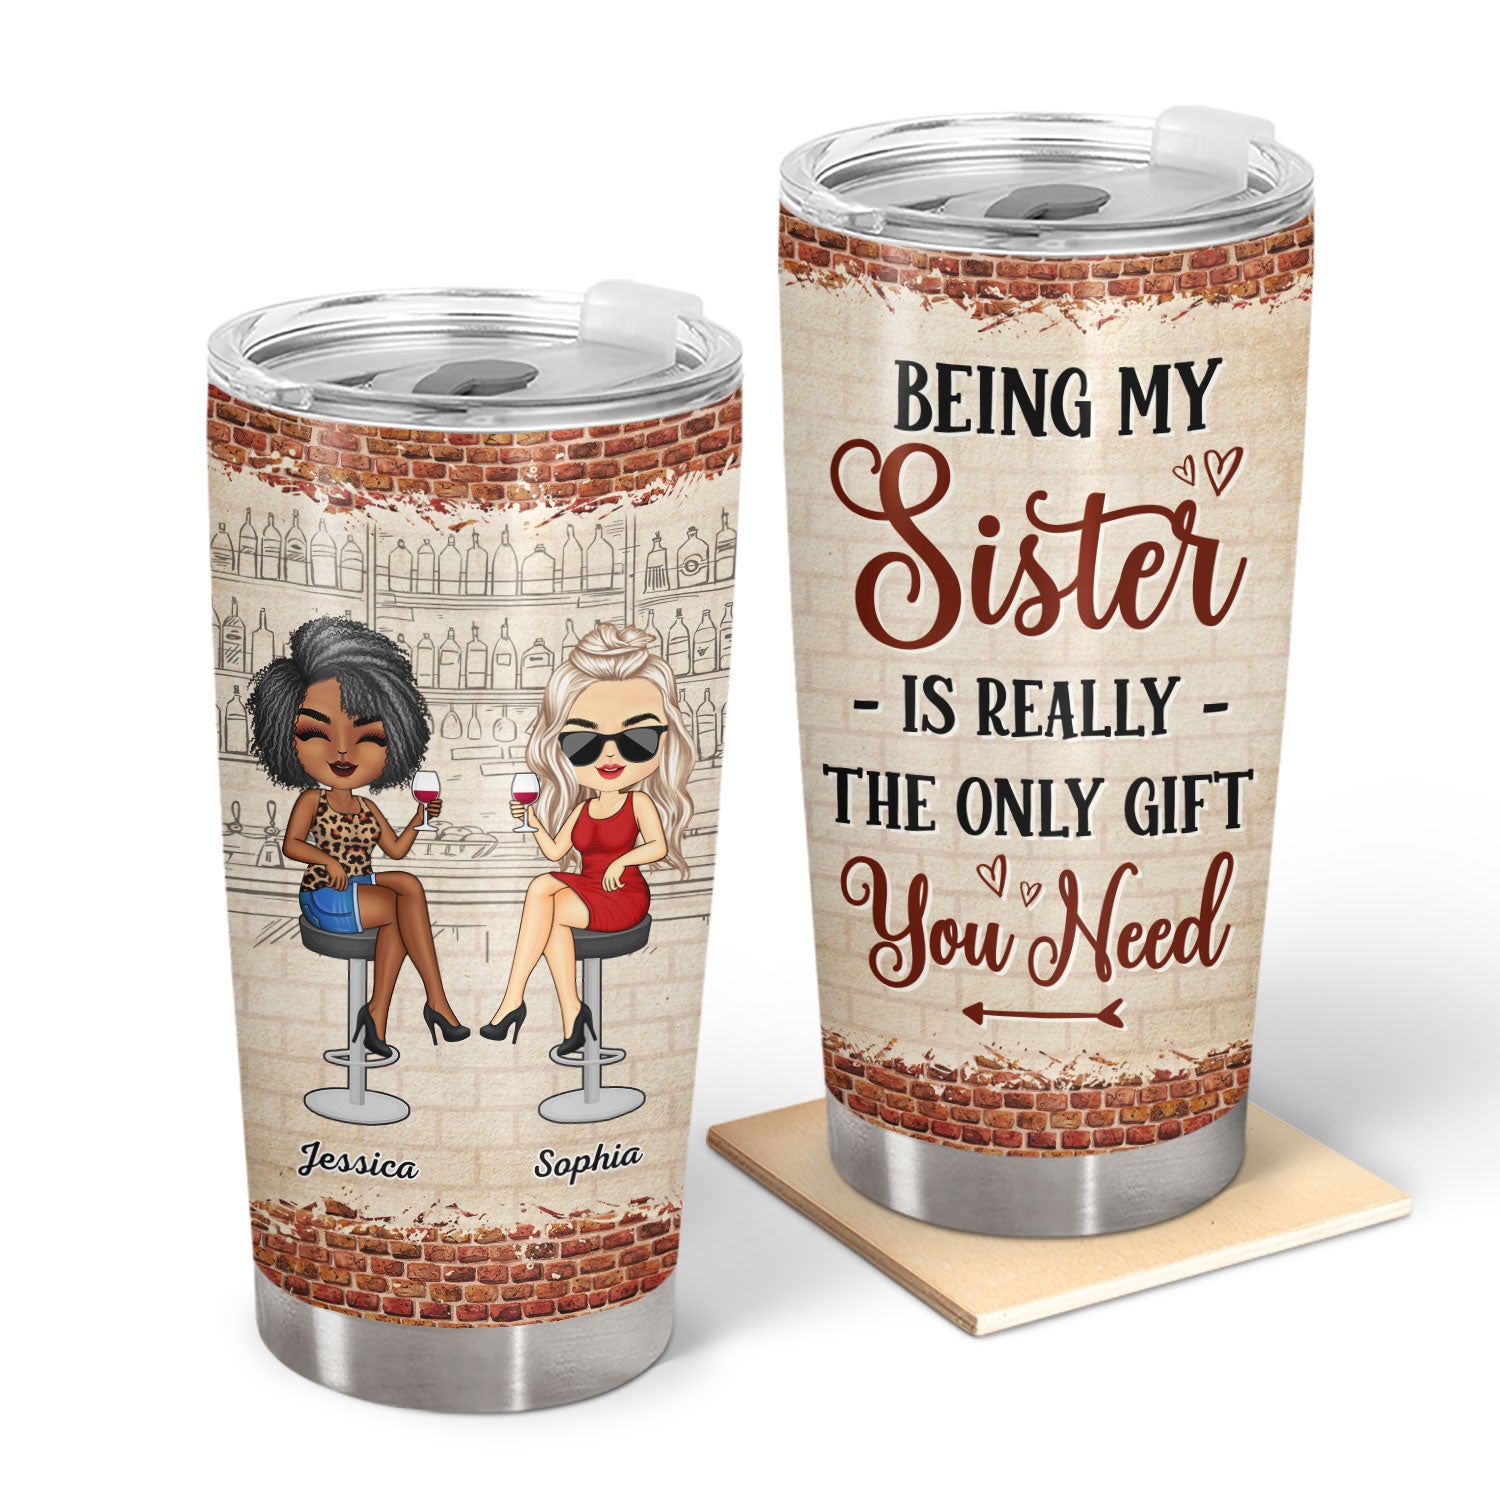 Being My Sister Is Really The Only Gift You Need - Gift For Sisters, Sibling, Family - Personalized Custom Tumbler